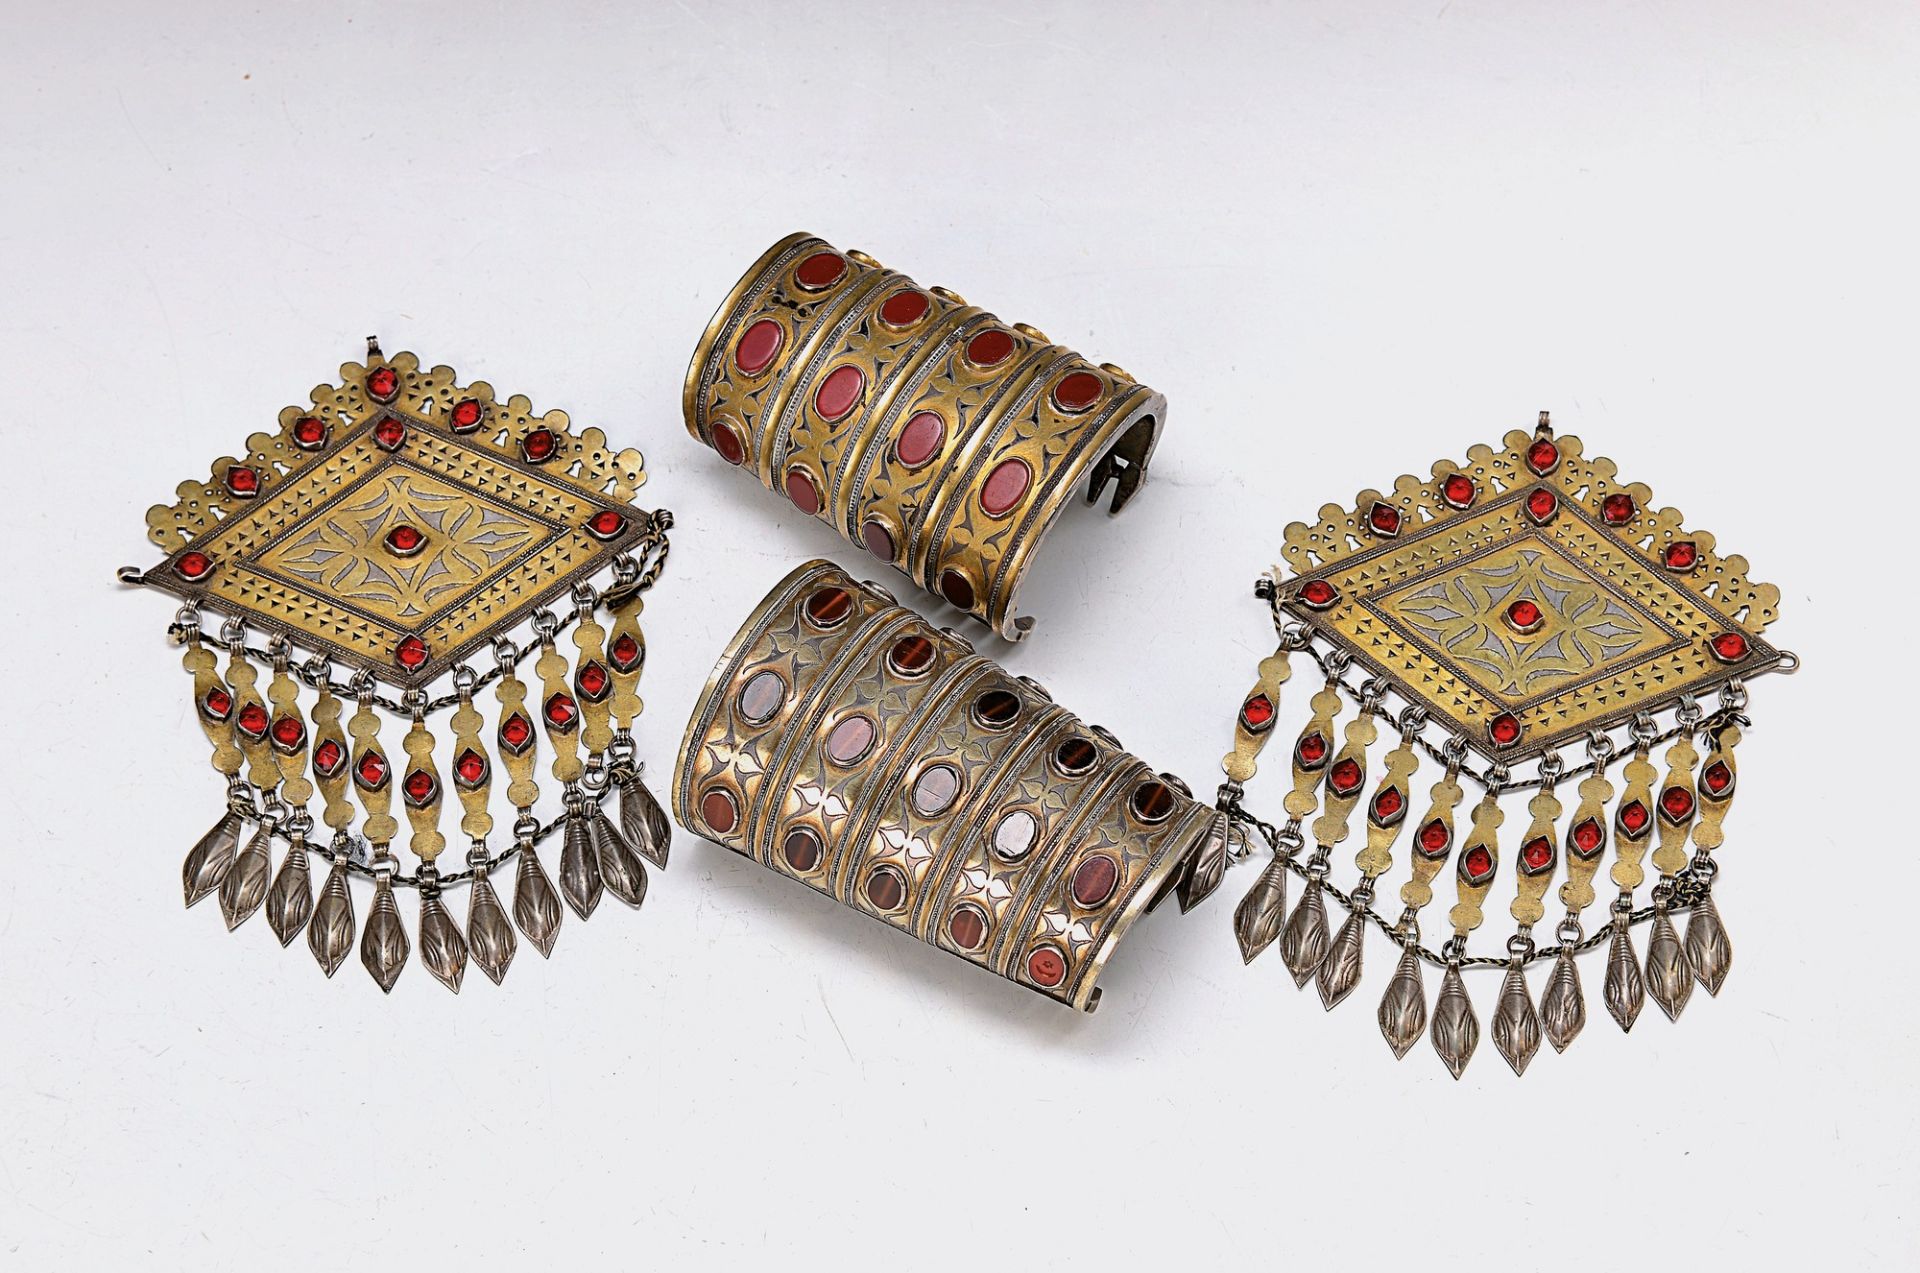 4 parts Turkmen jewelry, 20th c., metal with silver content, 2 bangles with carnelian trimming 13